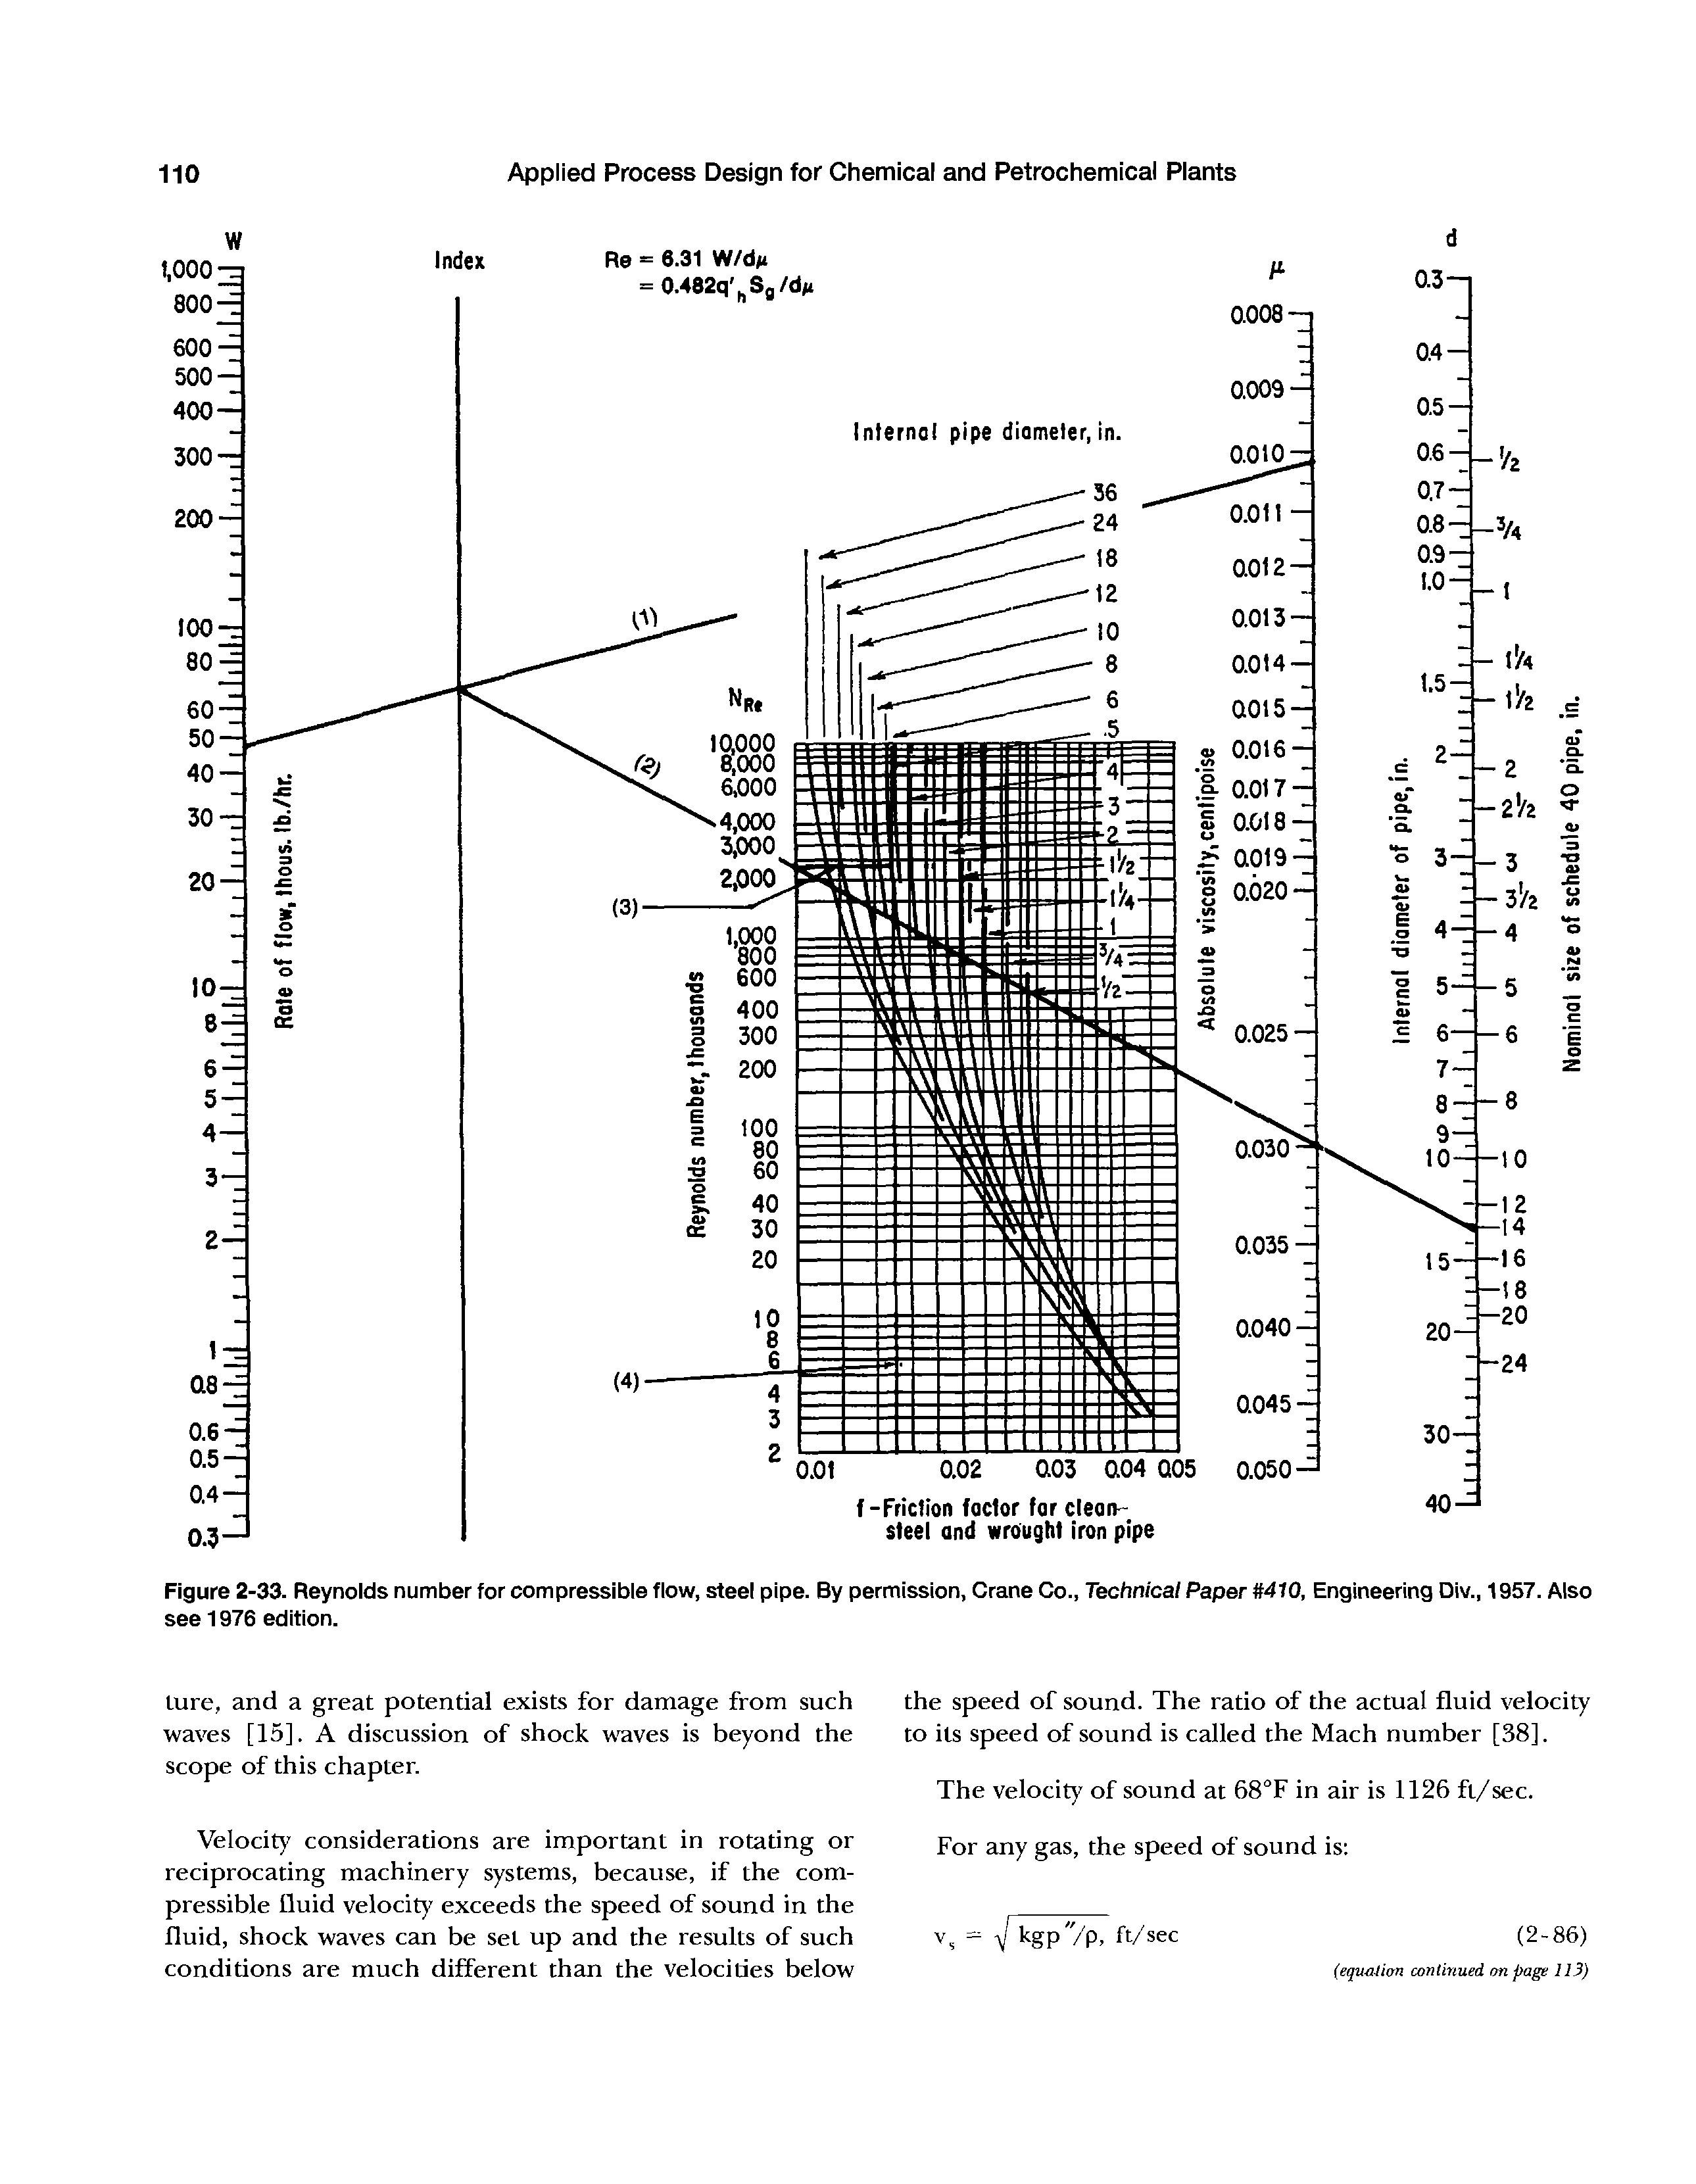 Figure 2-33. Reynolds number for compressible flow, steel pipe. By permission, Crane Co., Technical Paper 410, Engineering Div., 1957. Also see 1976 edition.